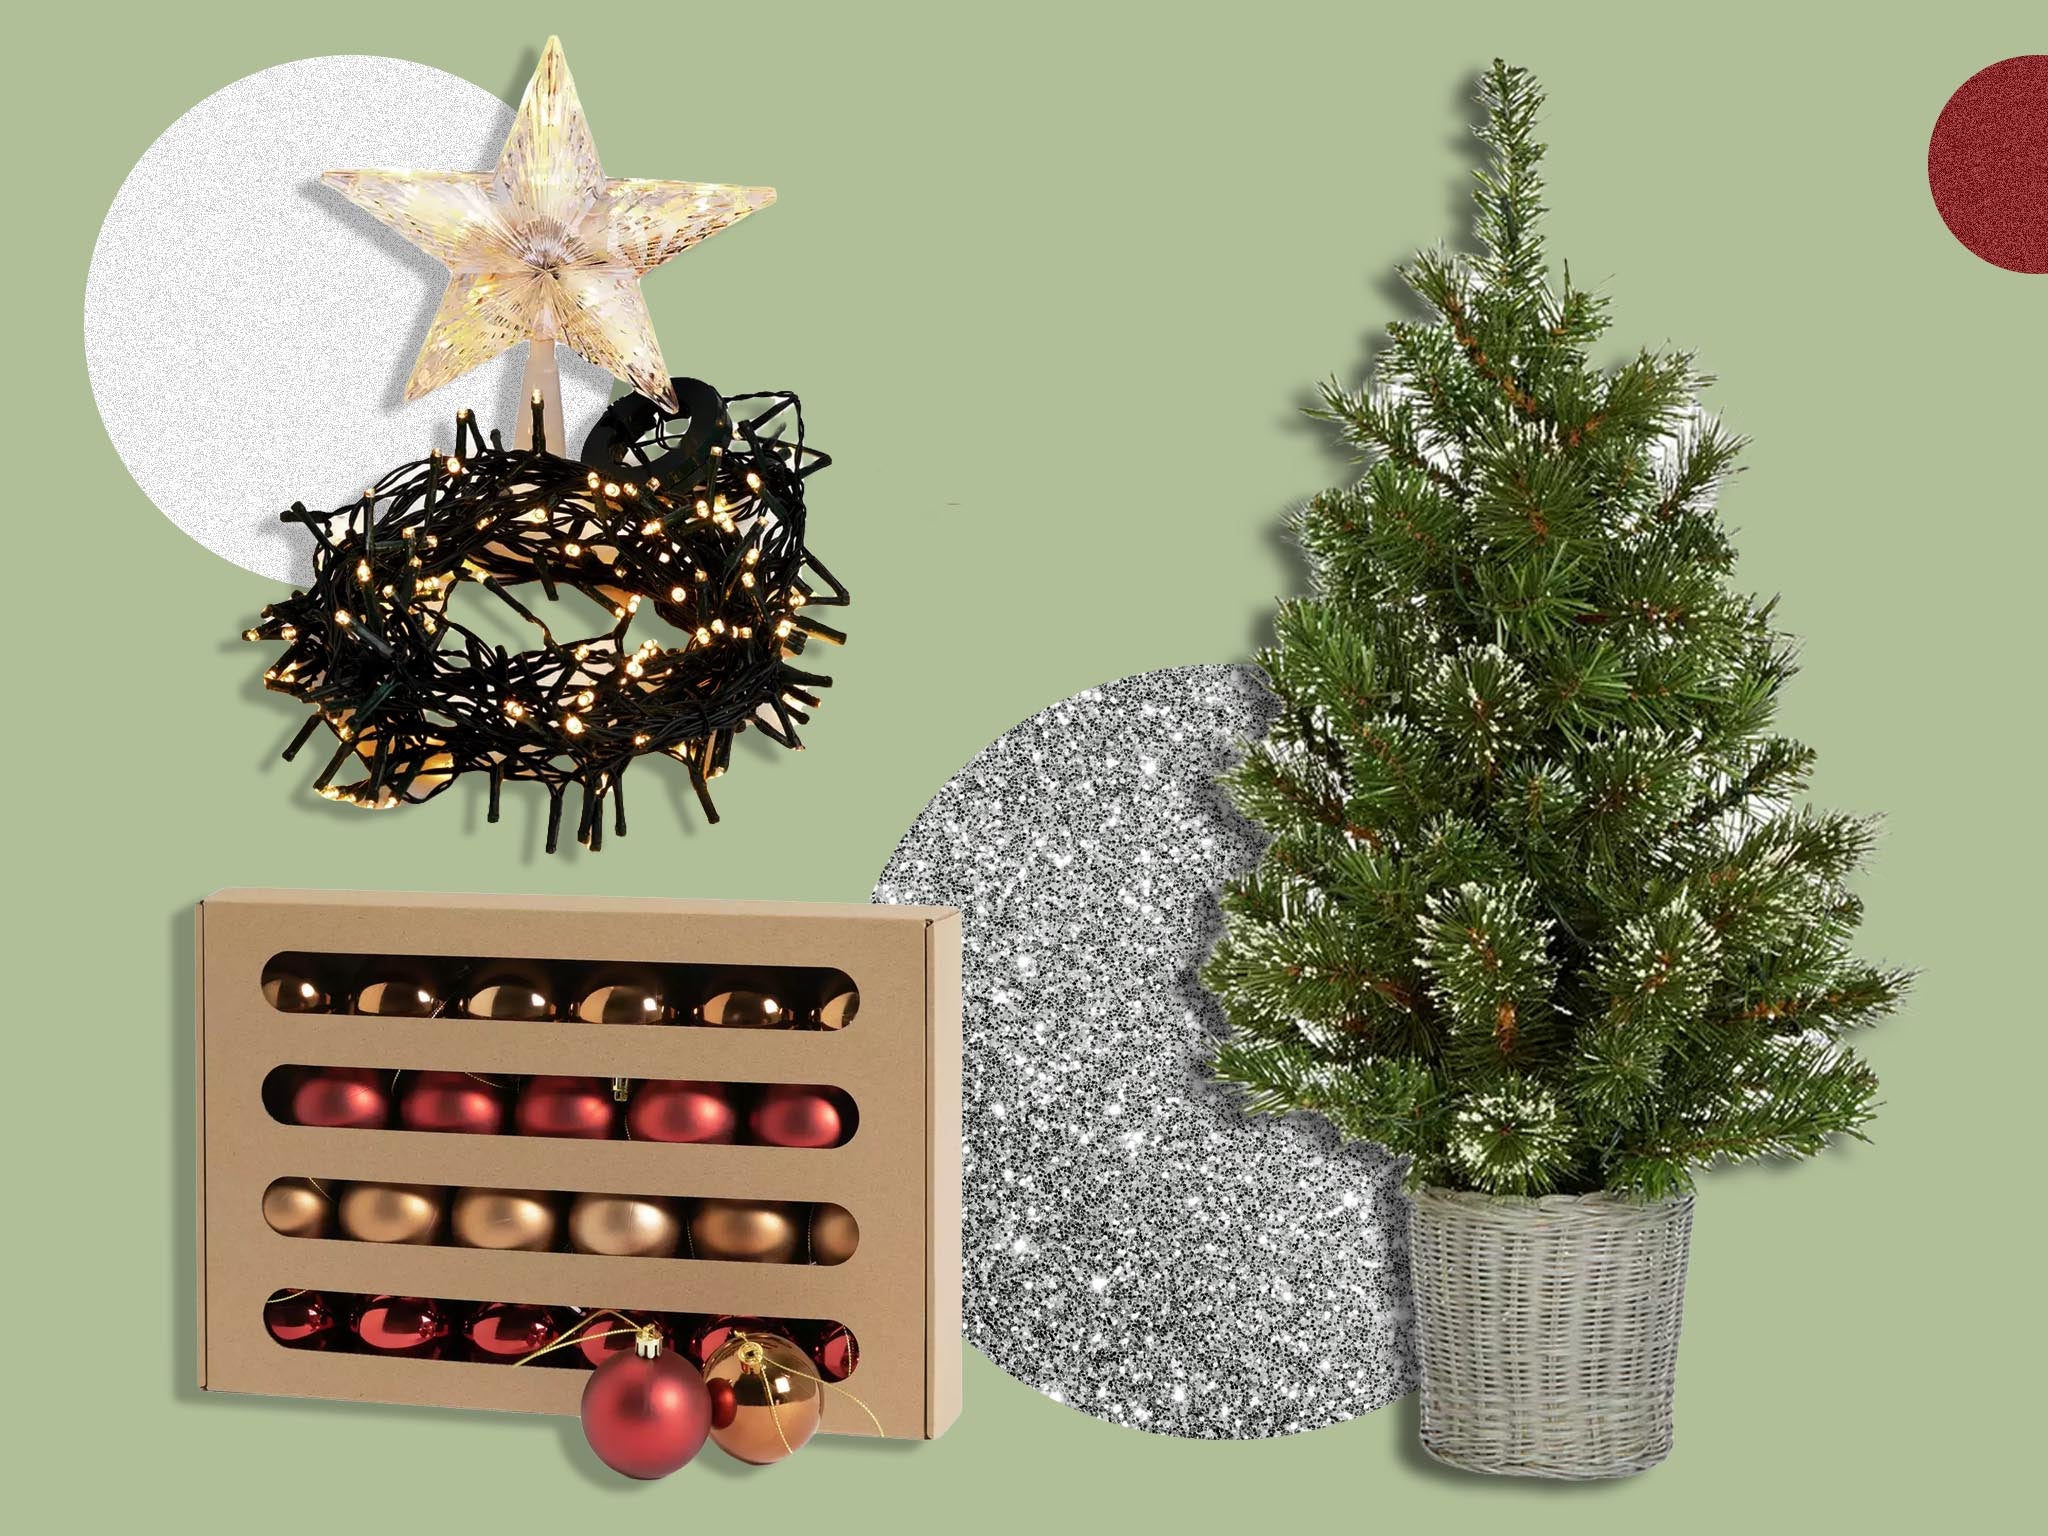 Savings include a pre-lit tree for under a tenner